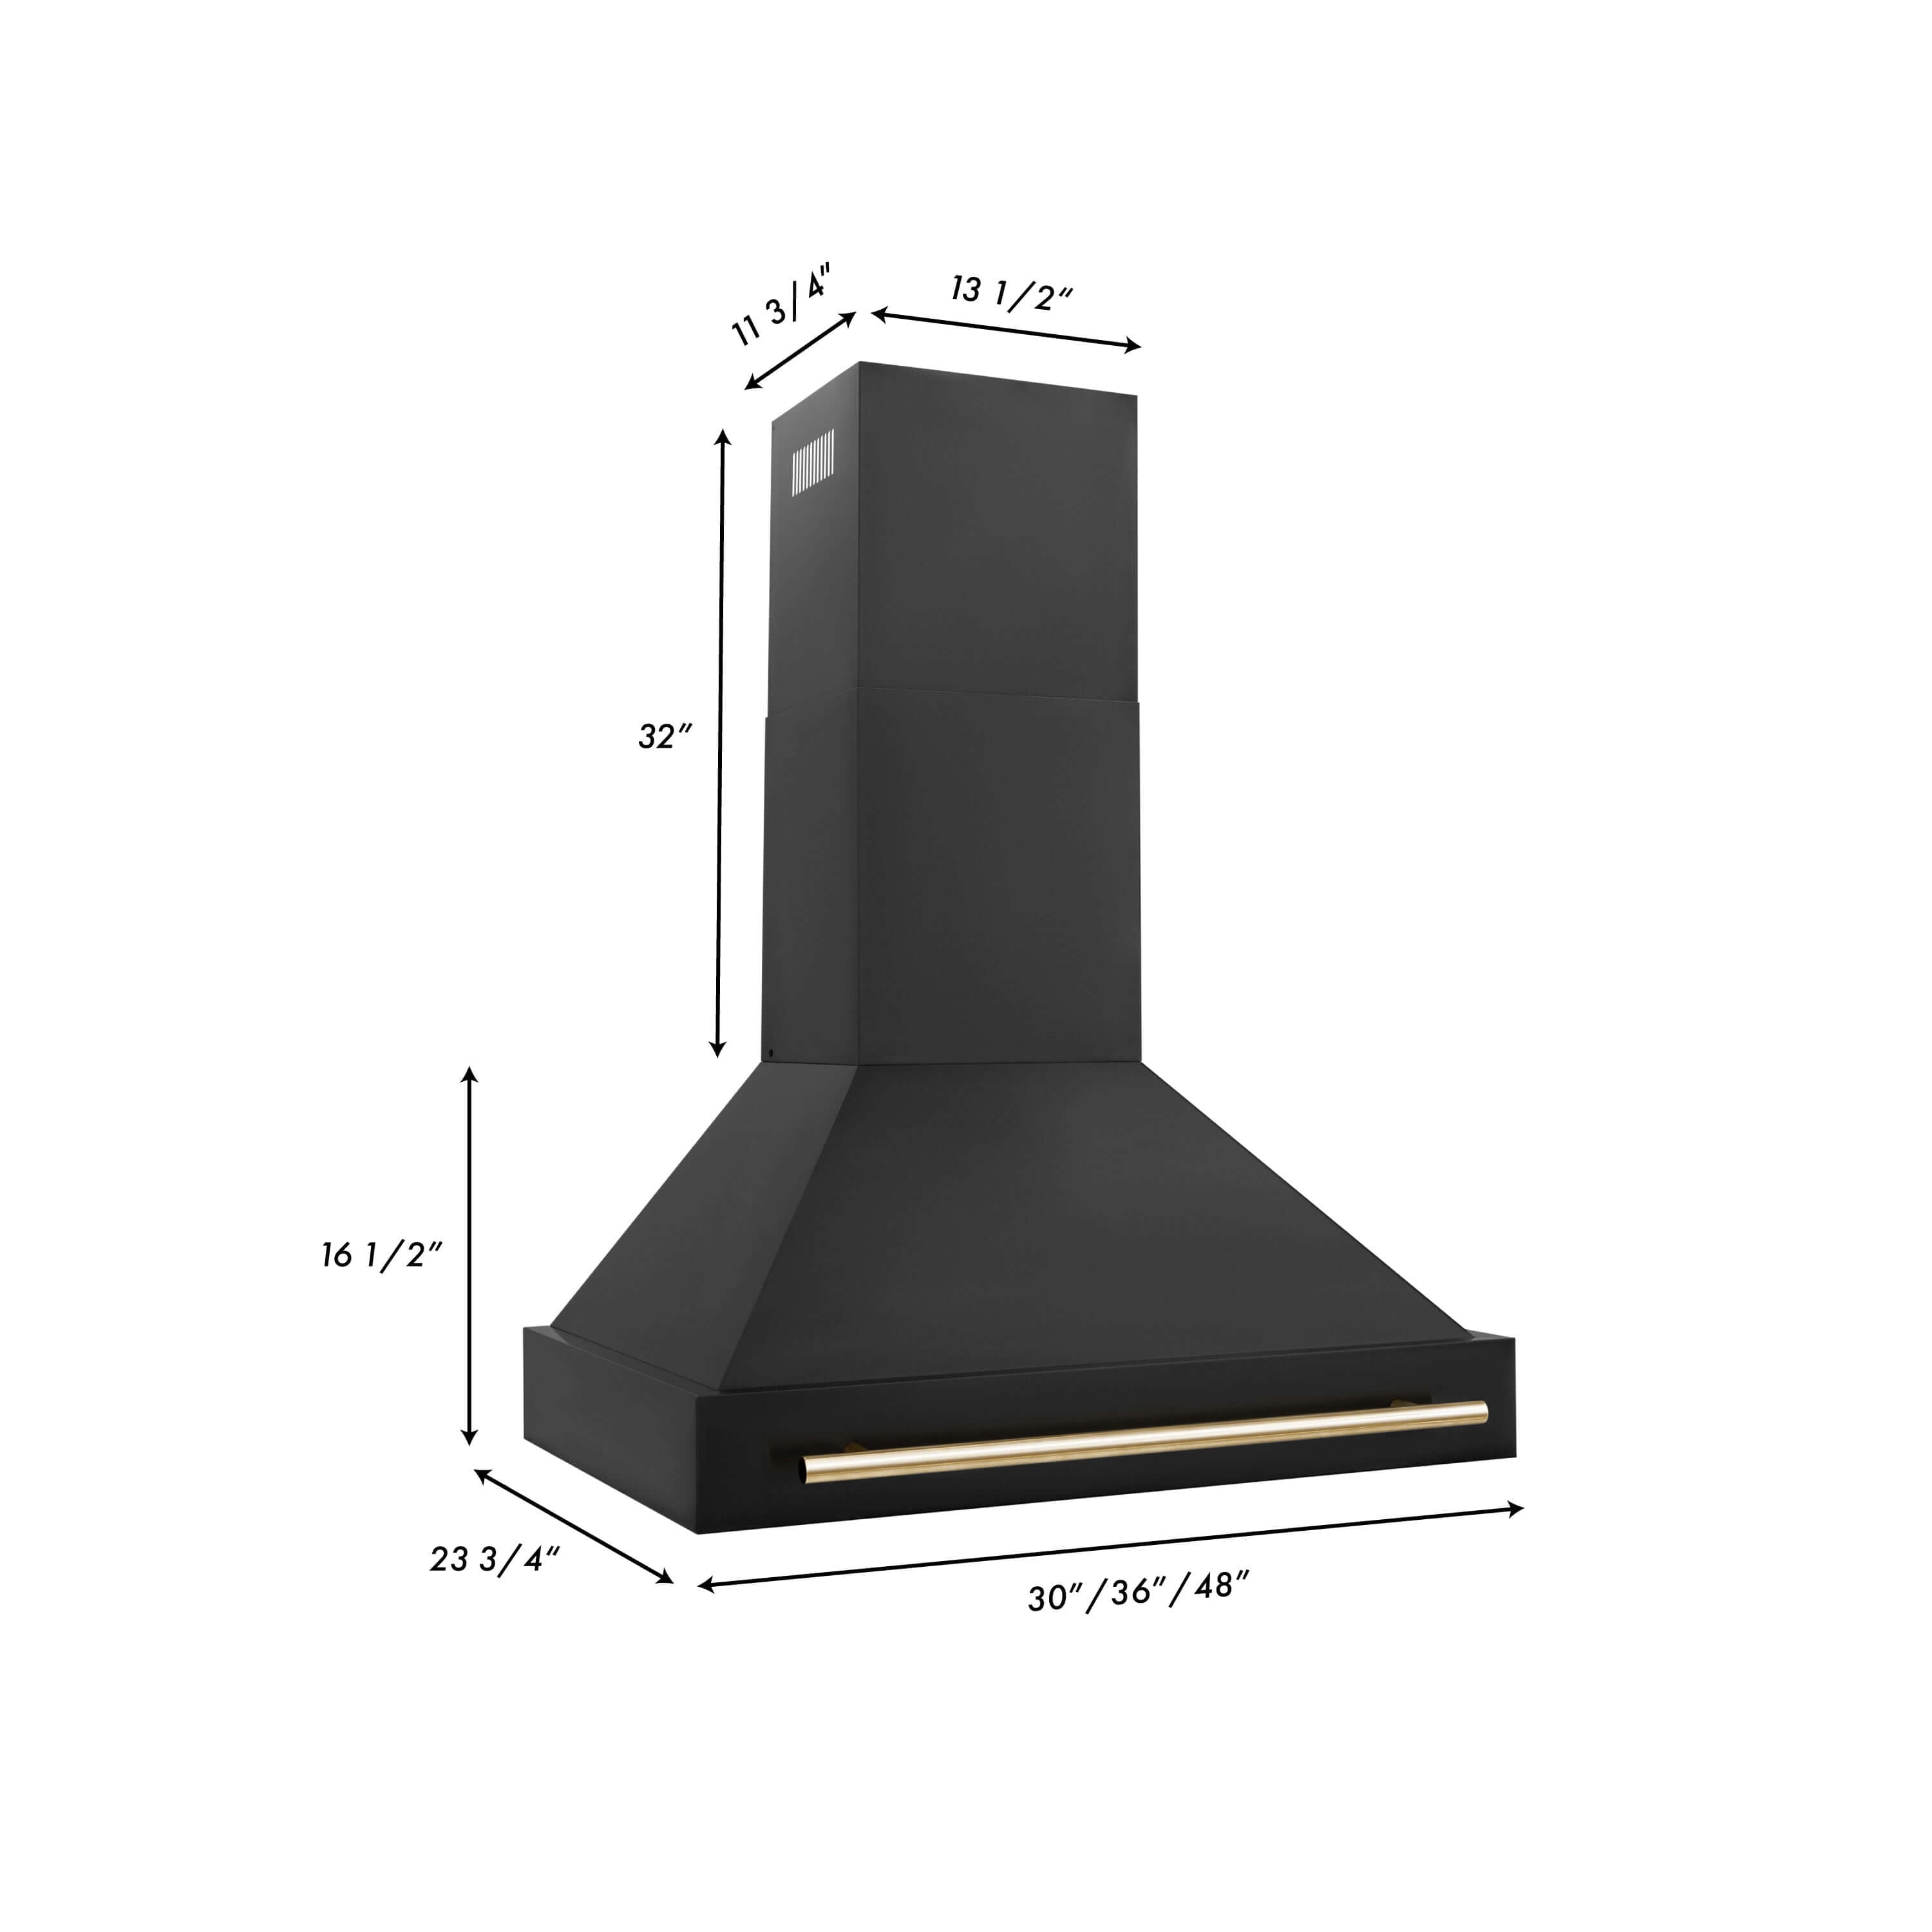 ZLINE Autograph Edition 36 in. Black Stainless Steel Range Hood with Handle (BS655Z-36) dimensional diagram and measurements.